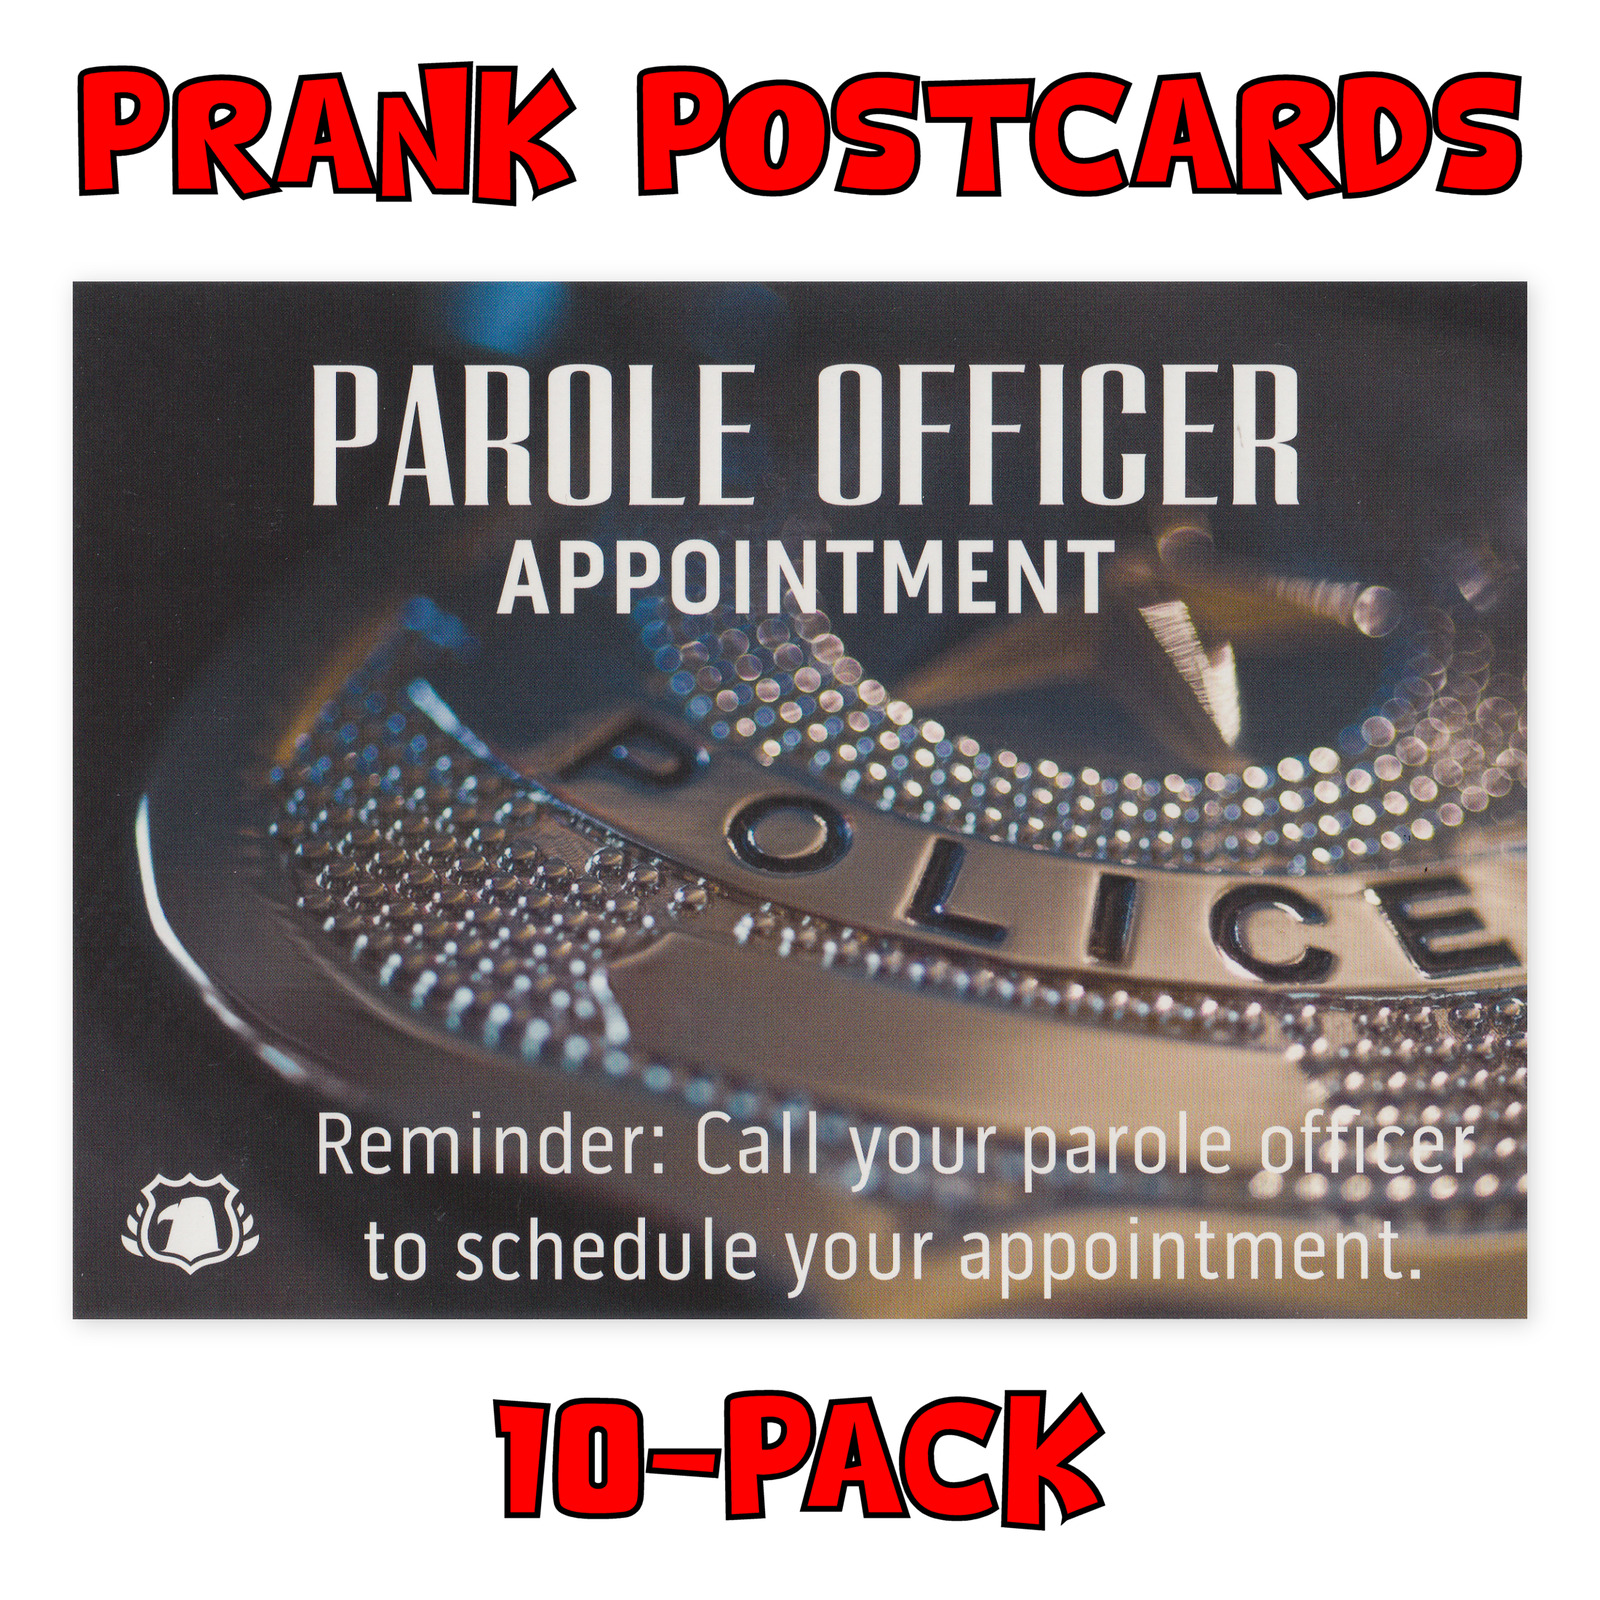 (10-Pack) Prank Postcards - Parole Officer - Send Them To Victims Yourself